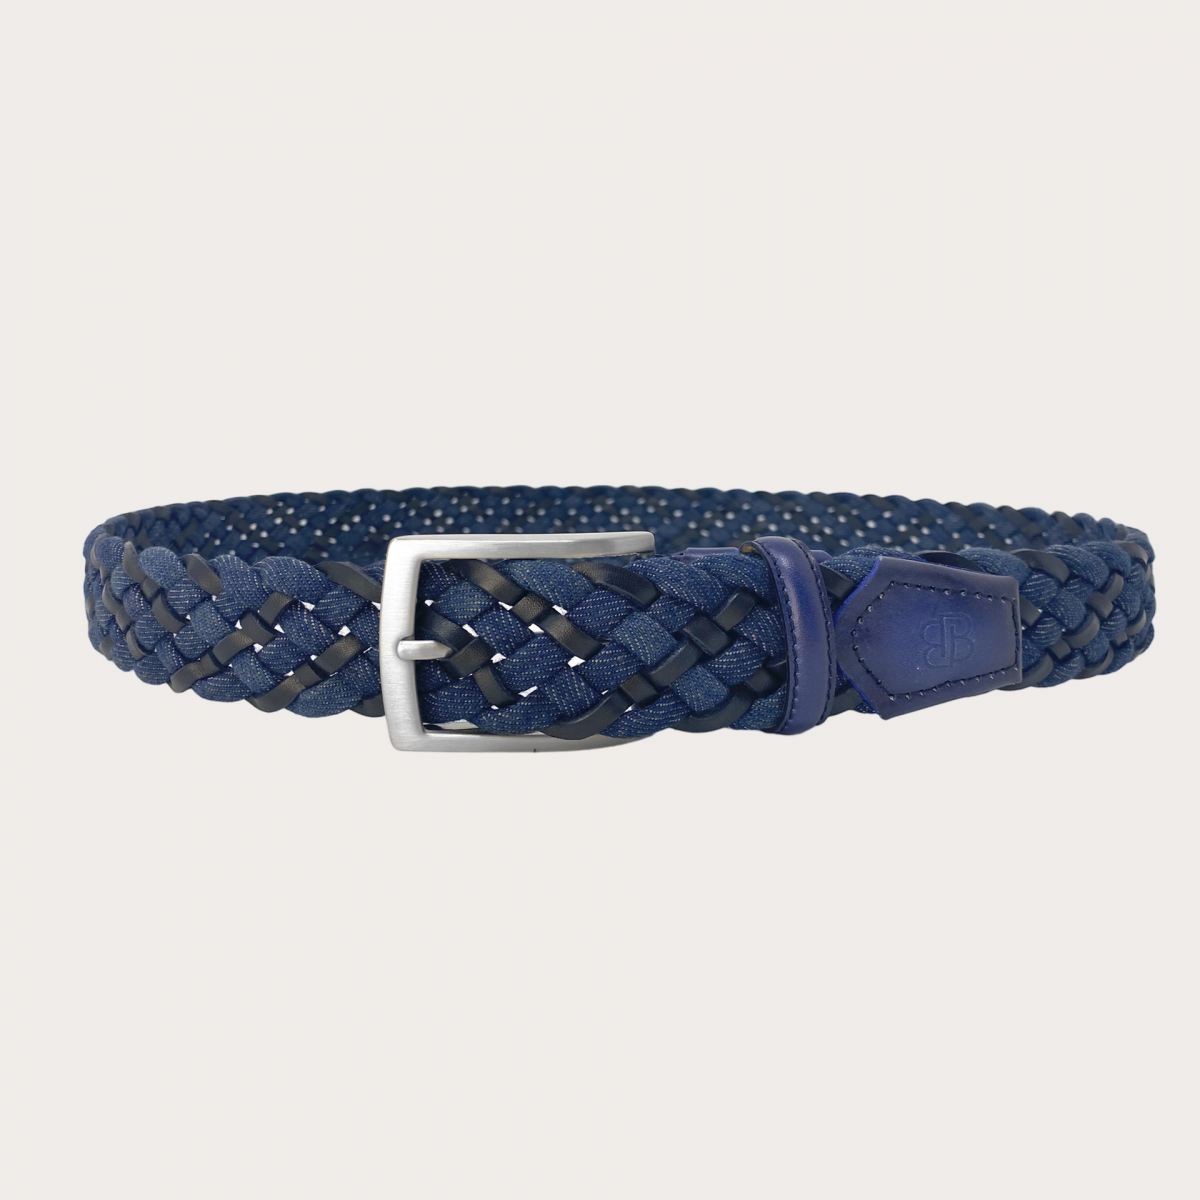 BRUCLE Braided blue and black jeans belt